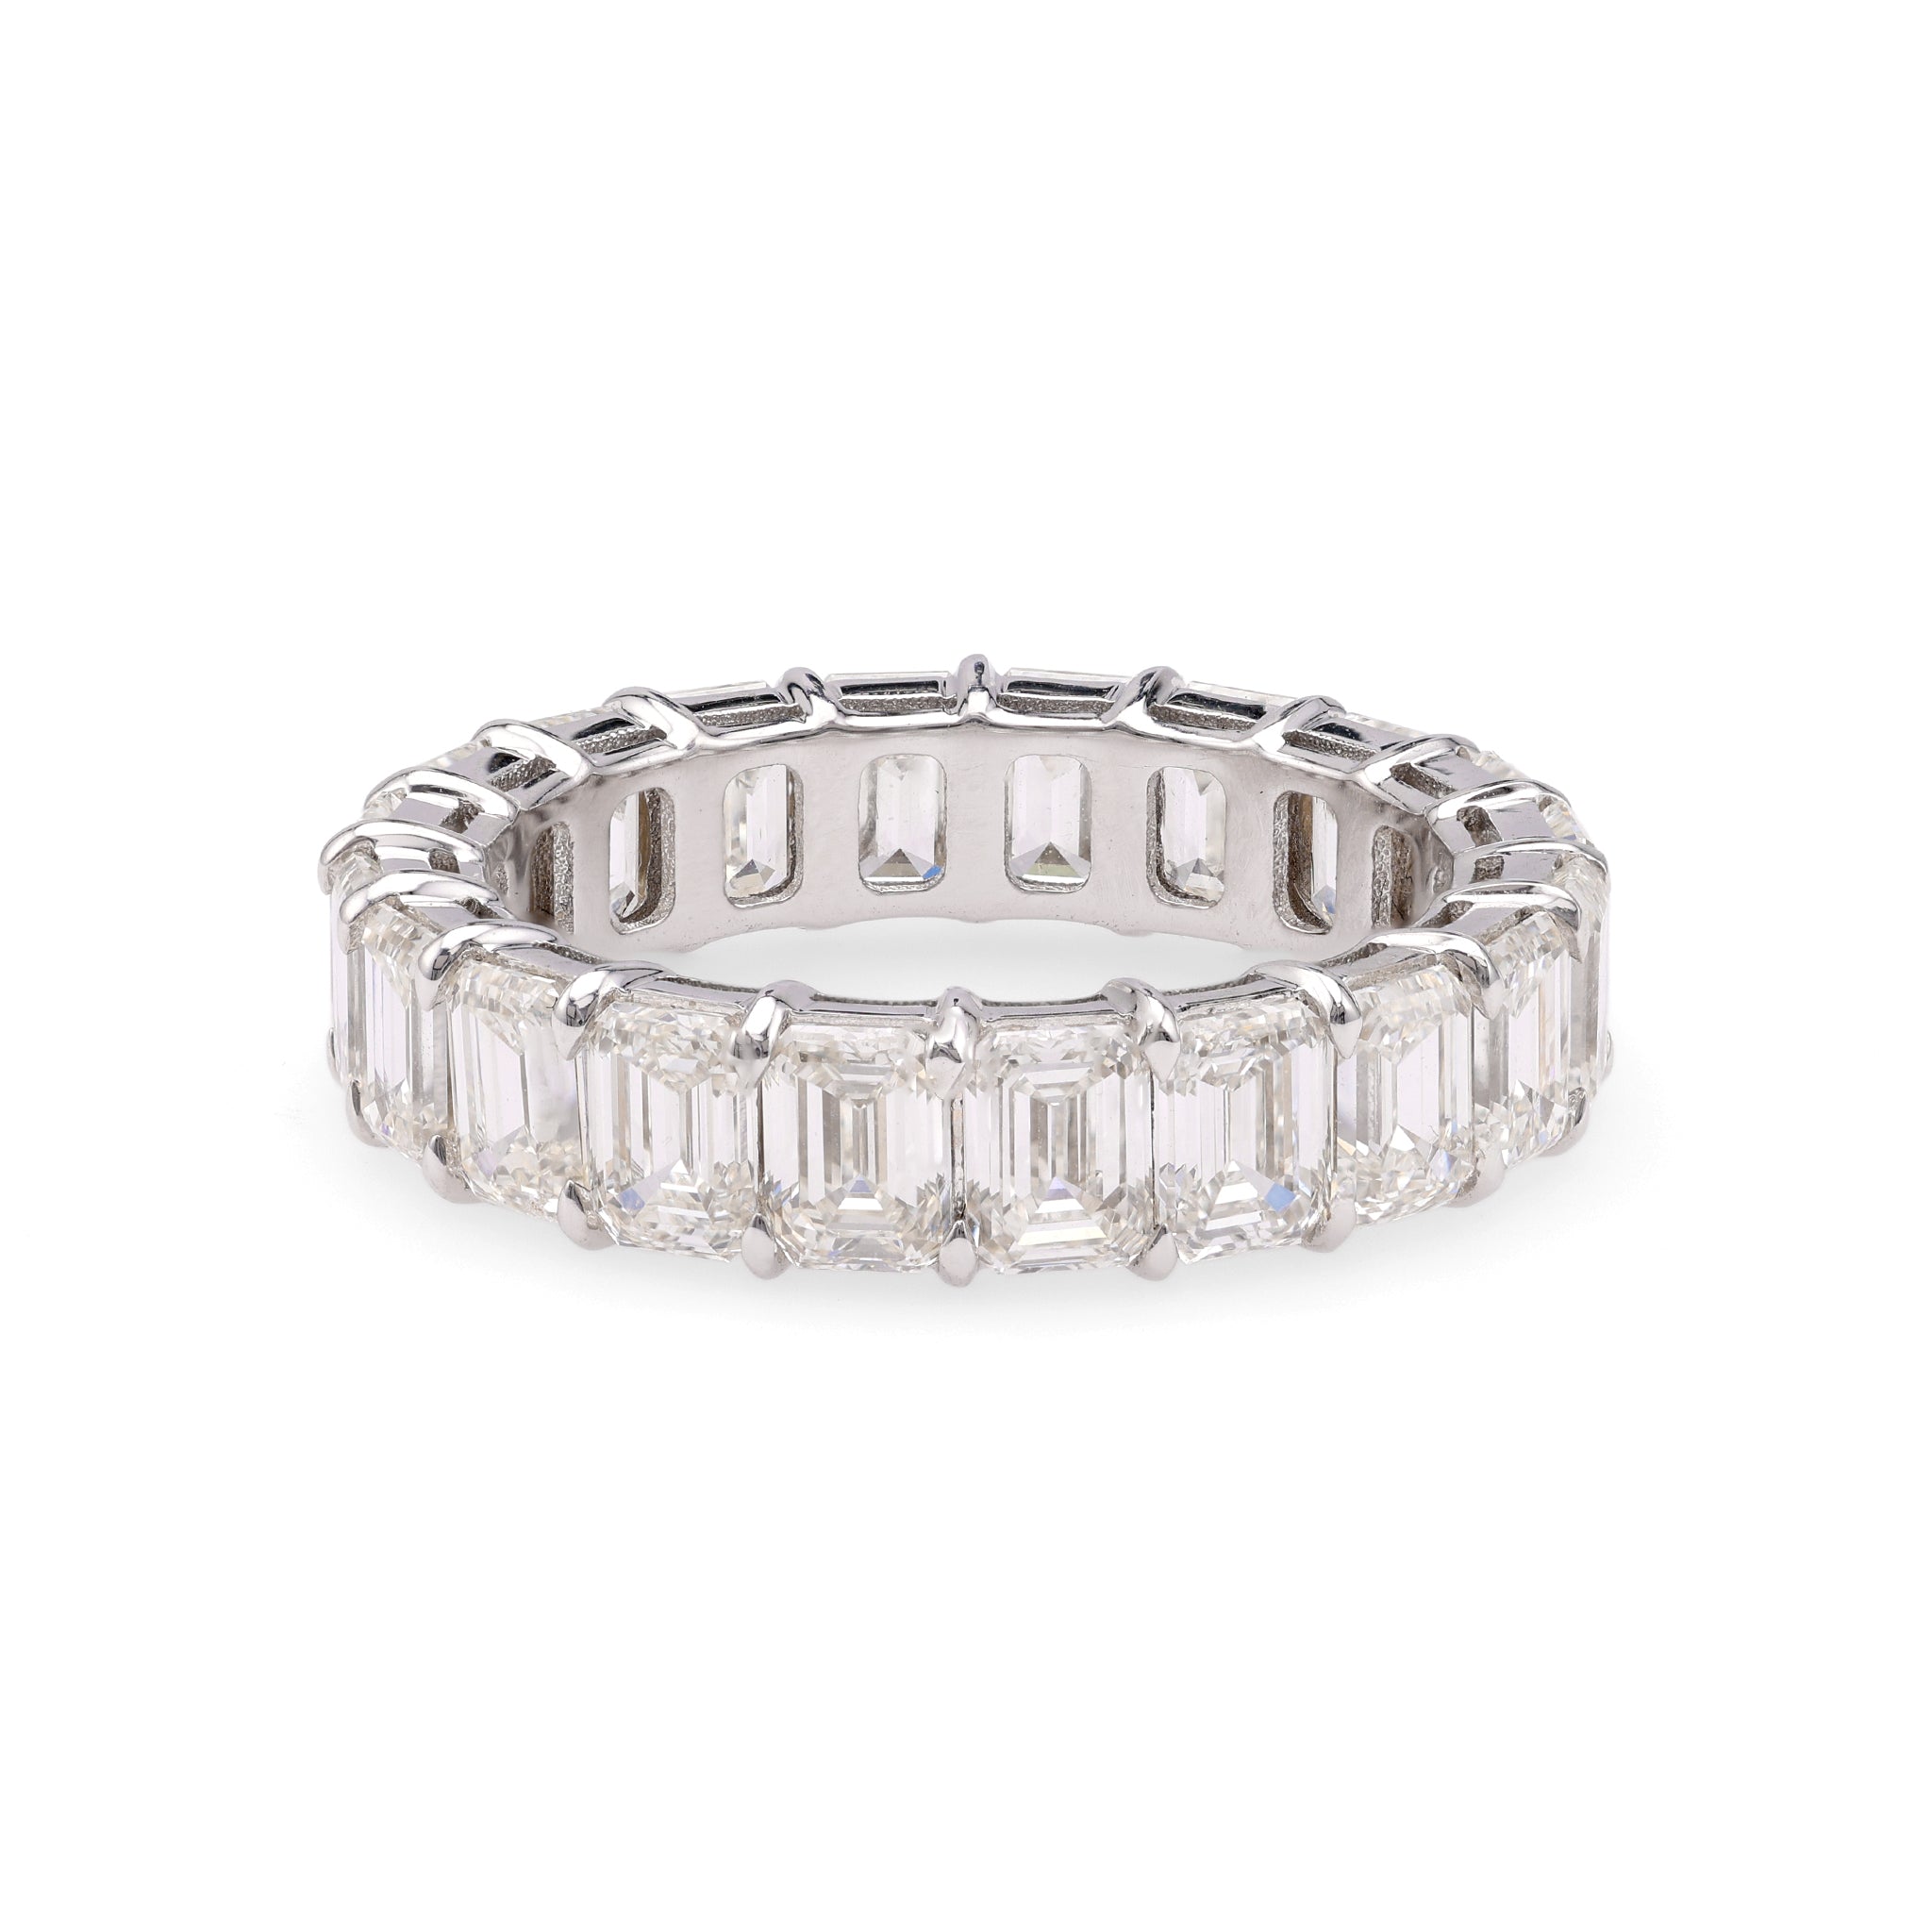 GIA 6.04 Carat Total Weight Diamond 18k White Gold Eternity Band Rings Jack Weir & Sons   